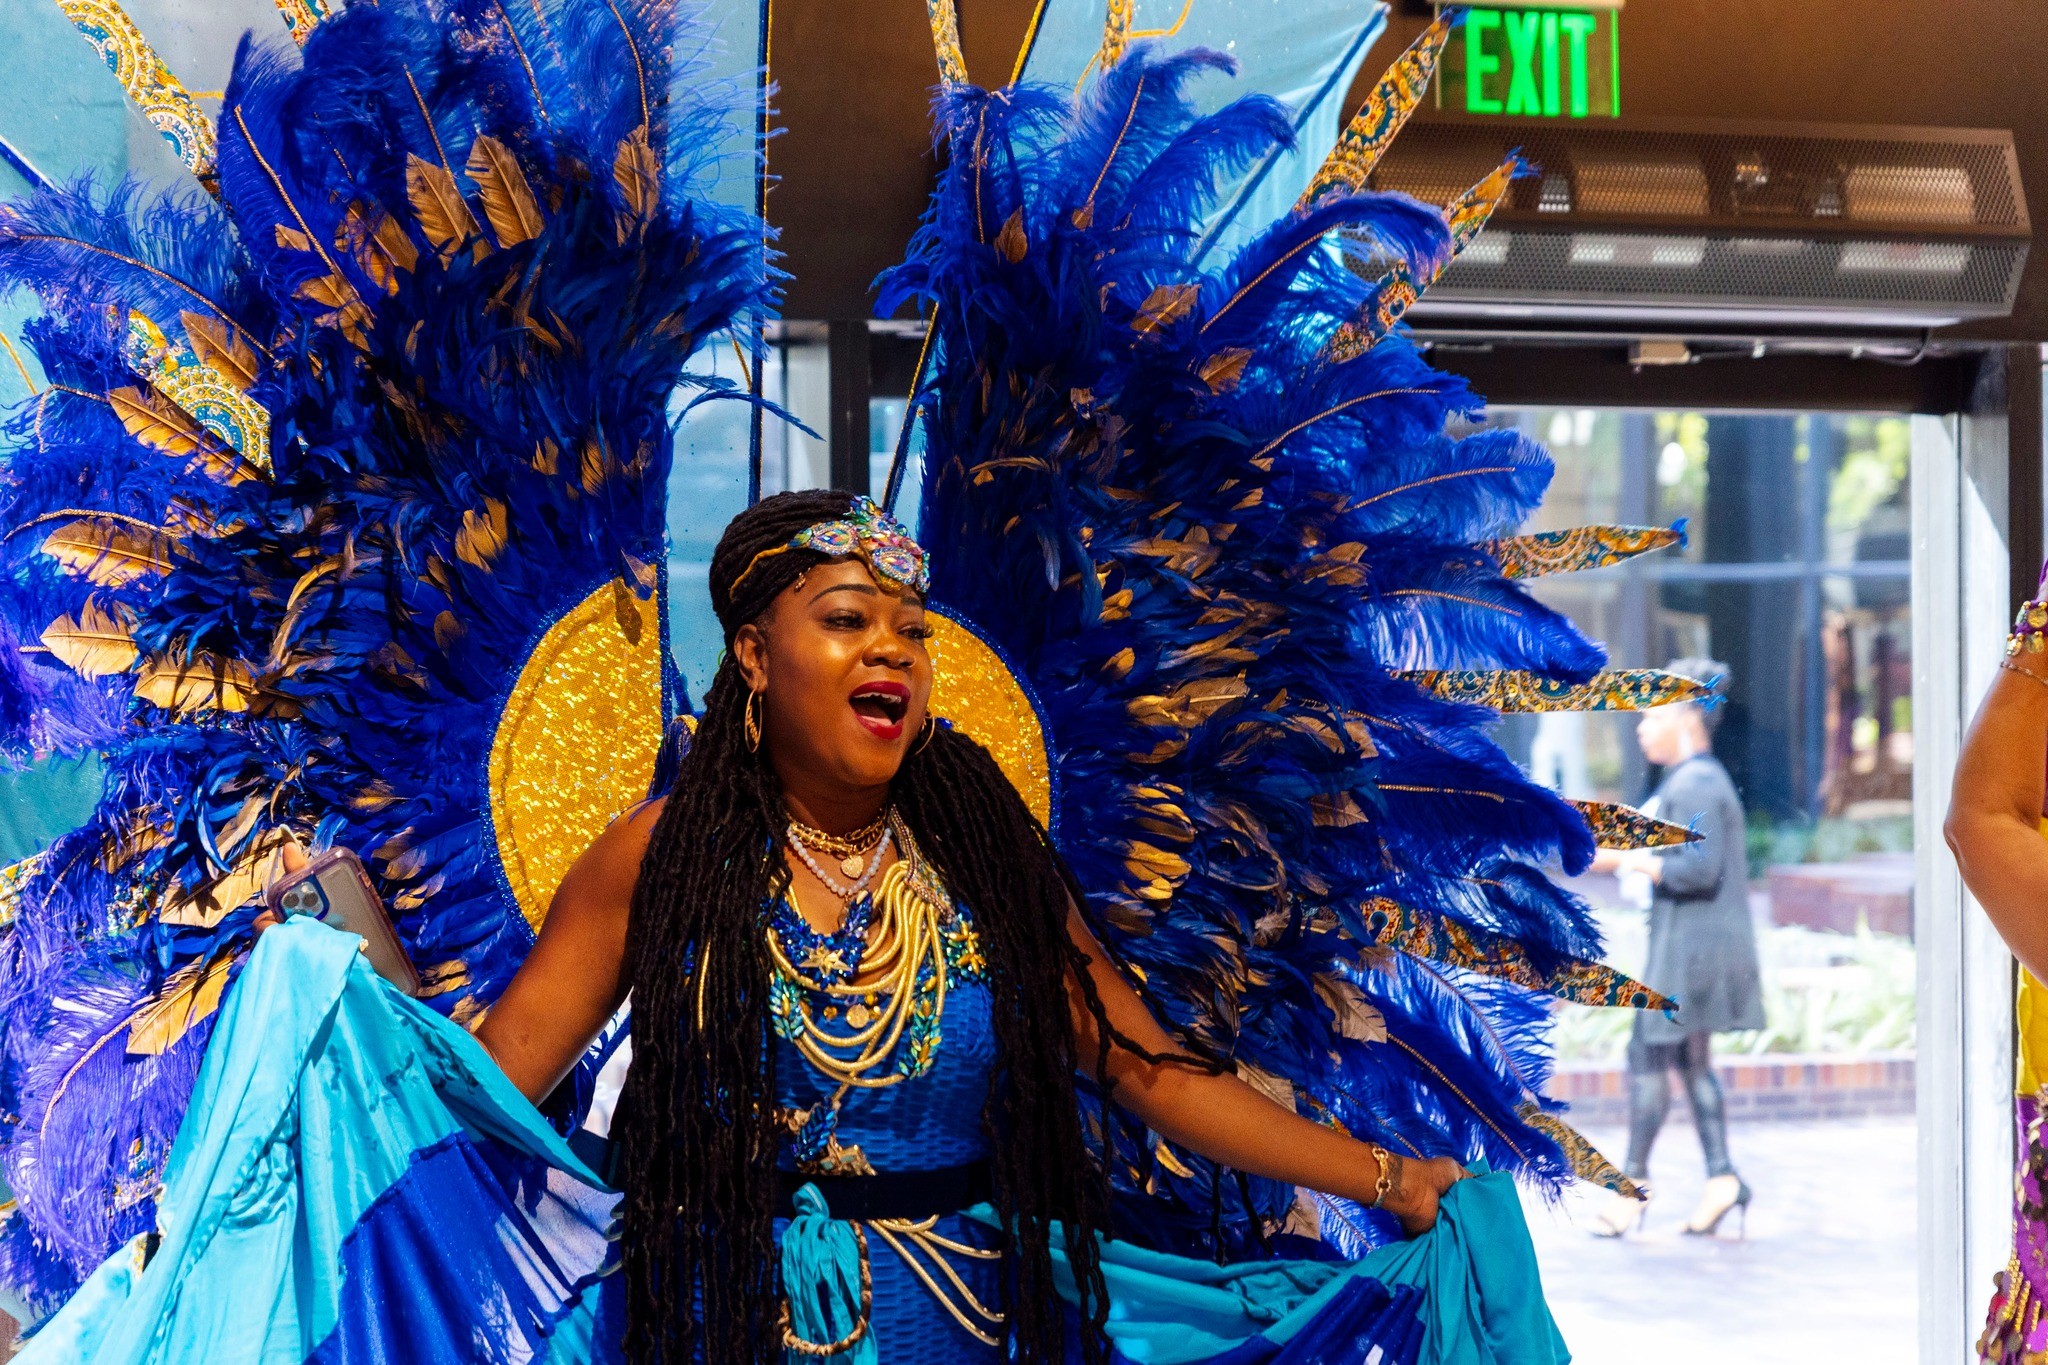 The 17th Annual Tampa Bay Caribbean Carnival returns to Tampa this